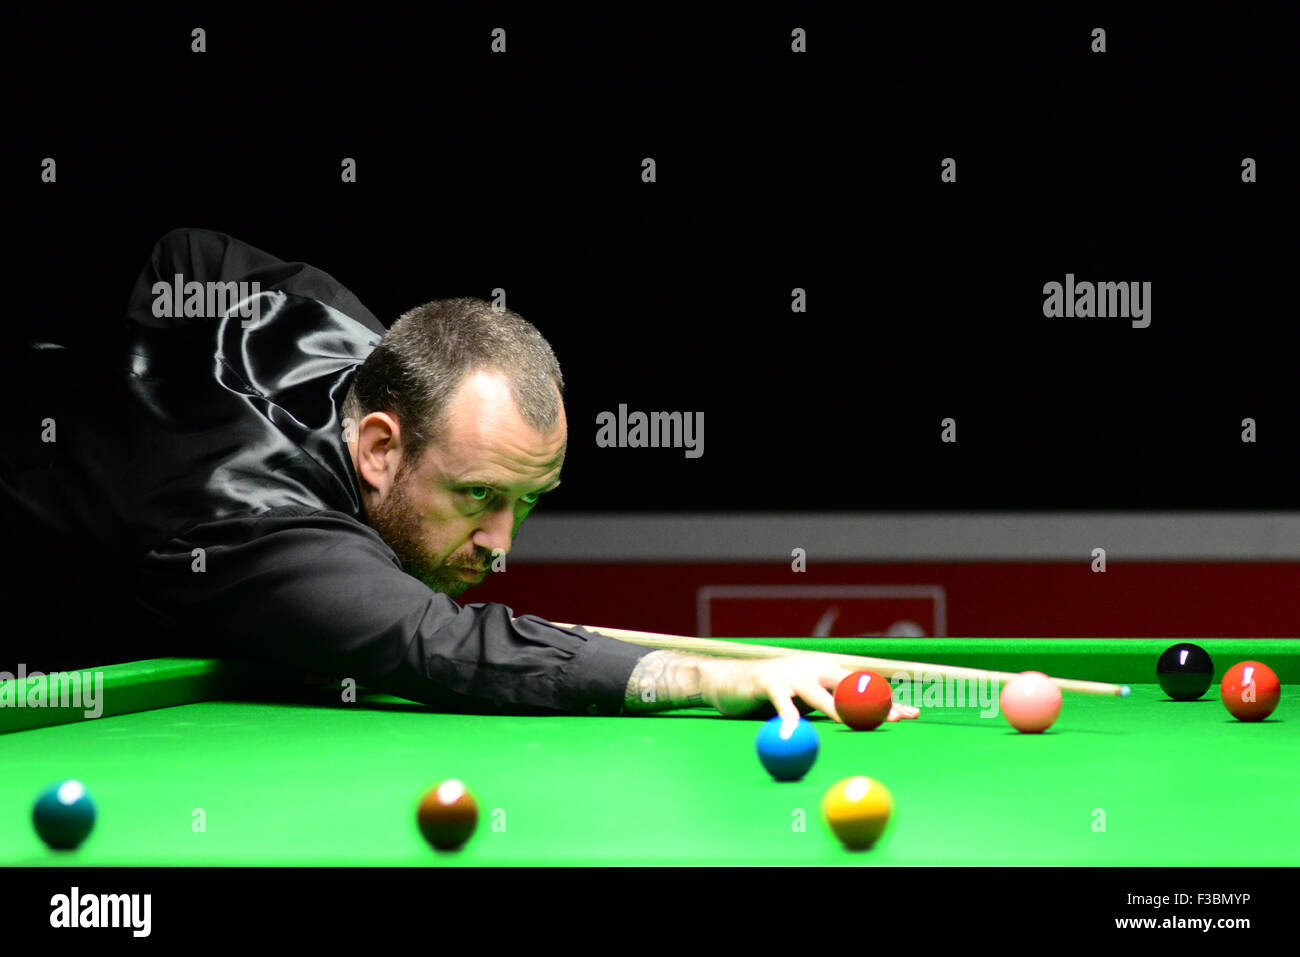 Professional snooker player Mark Williams playing in the 2015 International Championship qualifiers, Barnsley, UK. Stock Photo